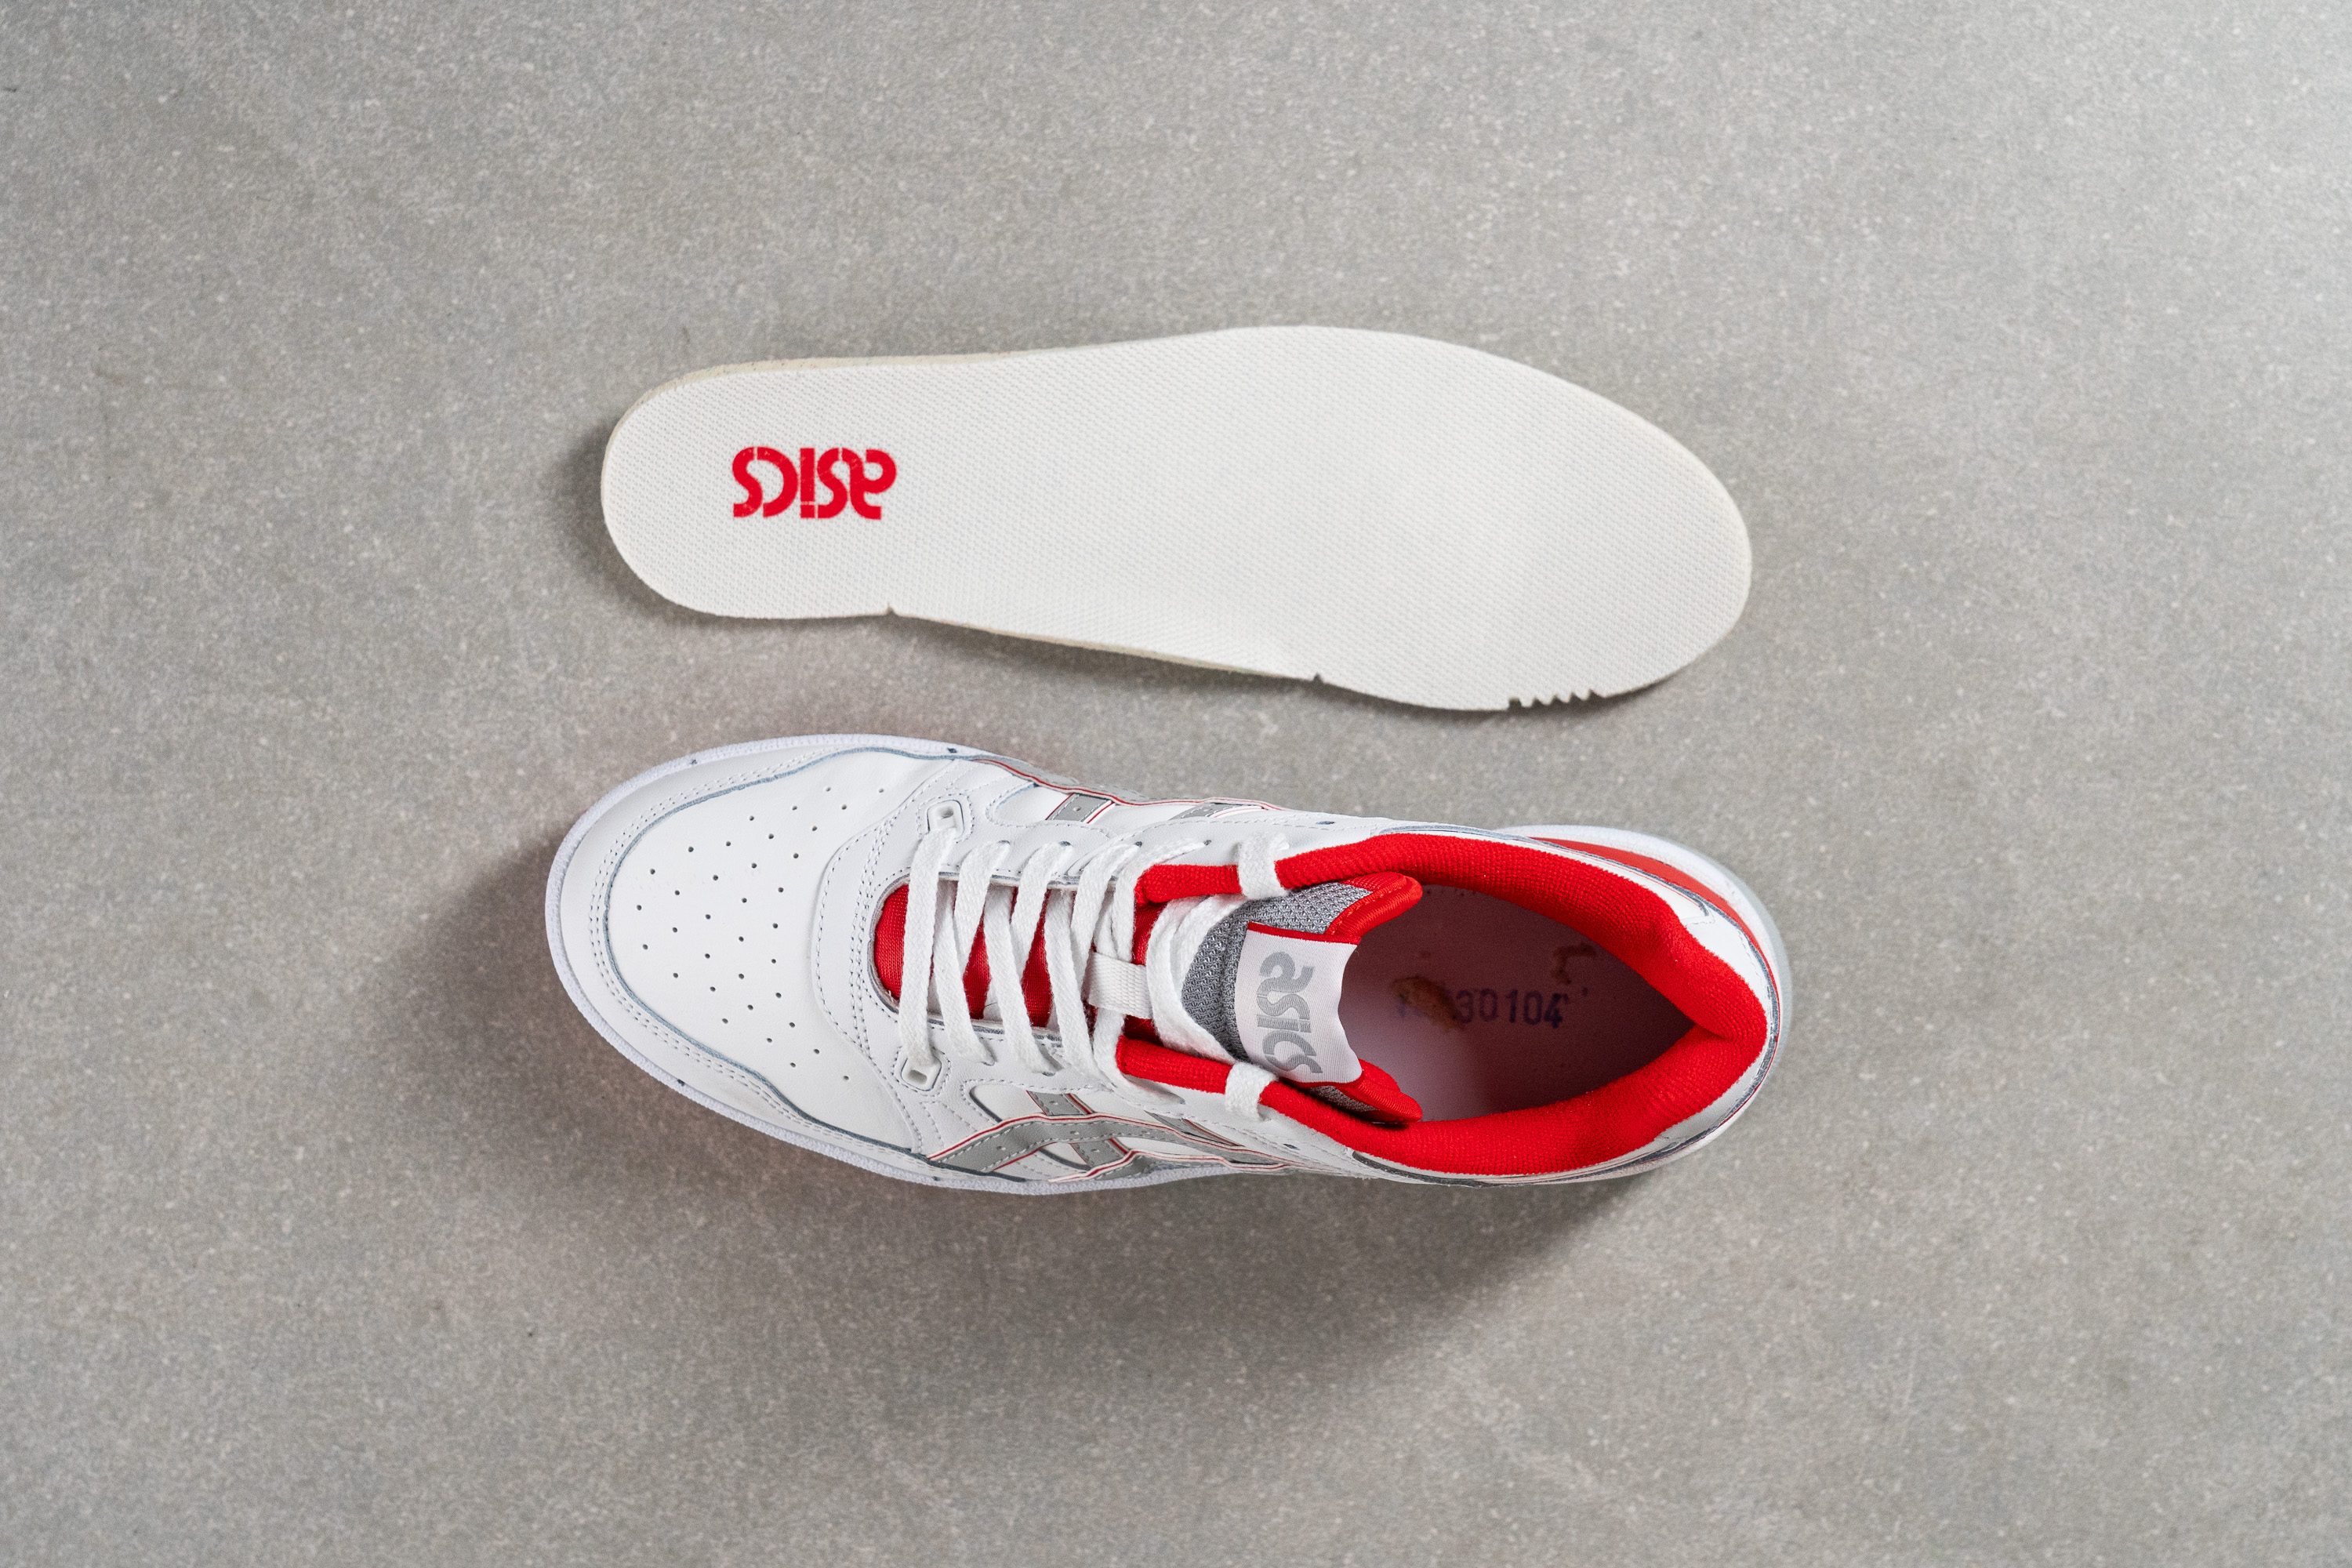 Asics EX89 Removable insole